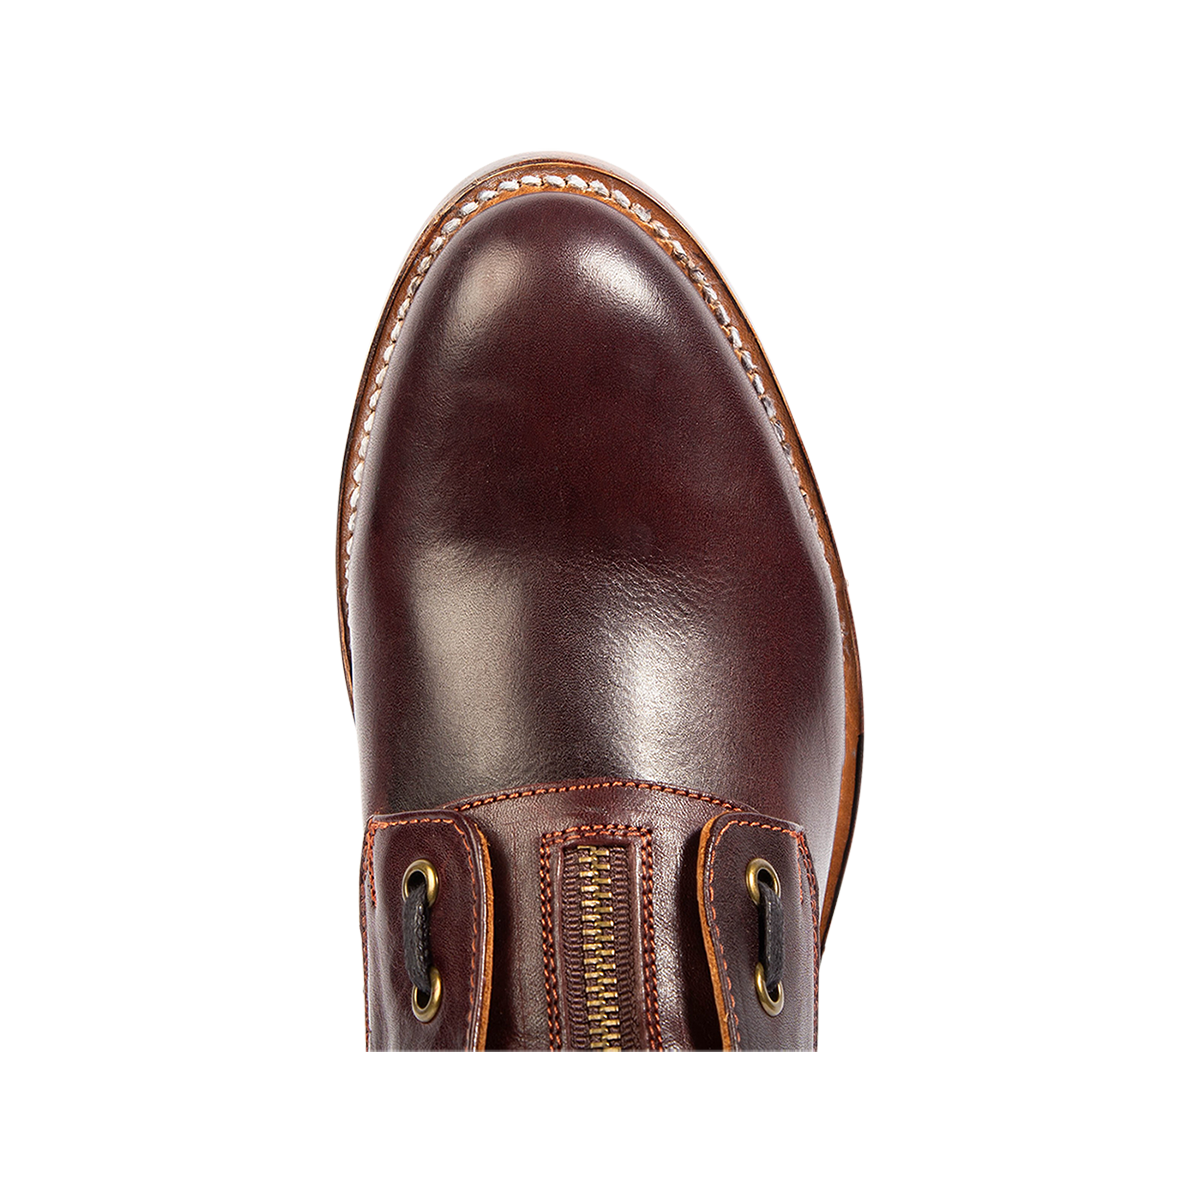 Top view showing an almond toe on FREEBIRD men's Porter wine leather boot